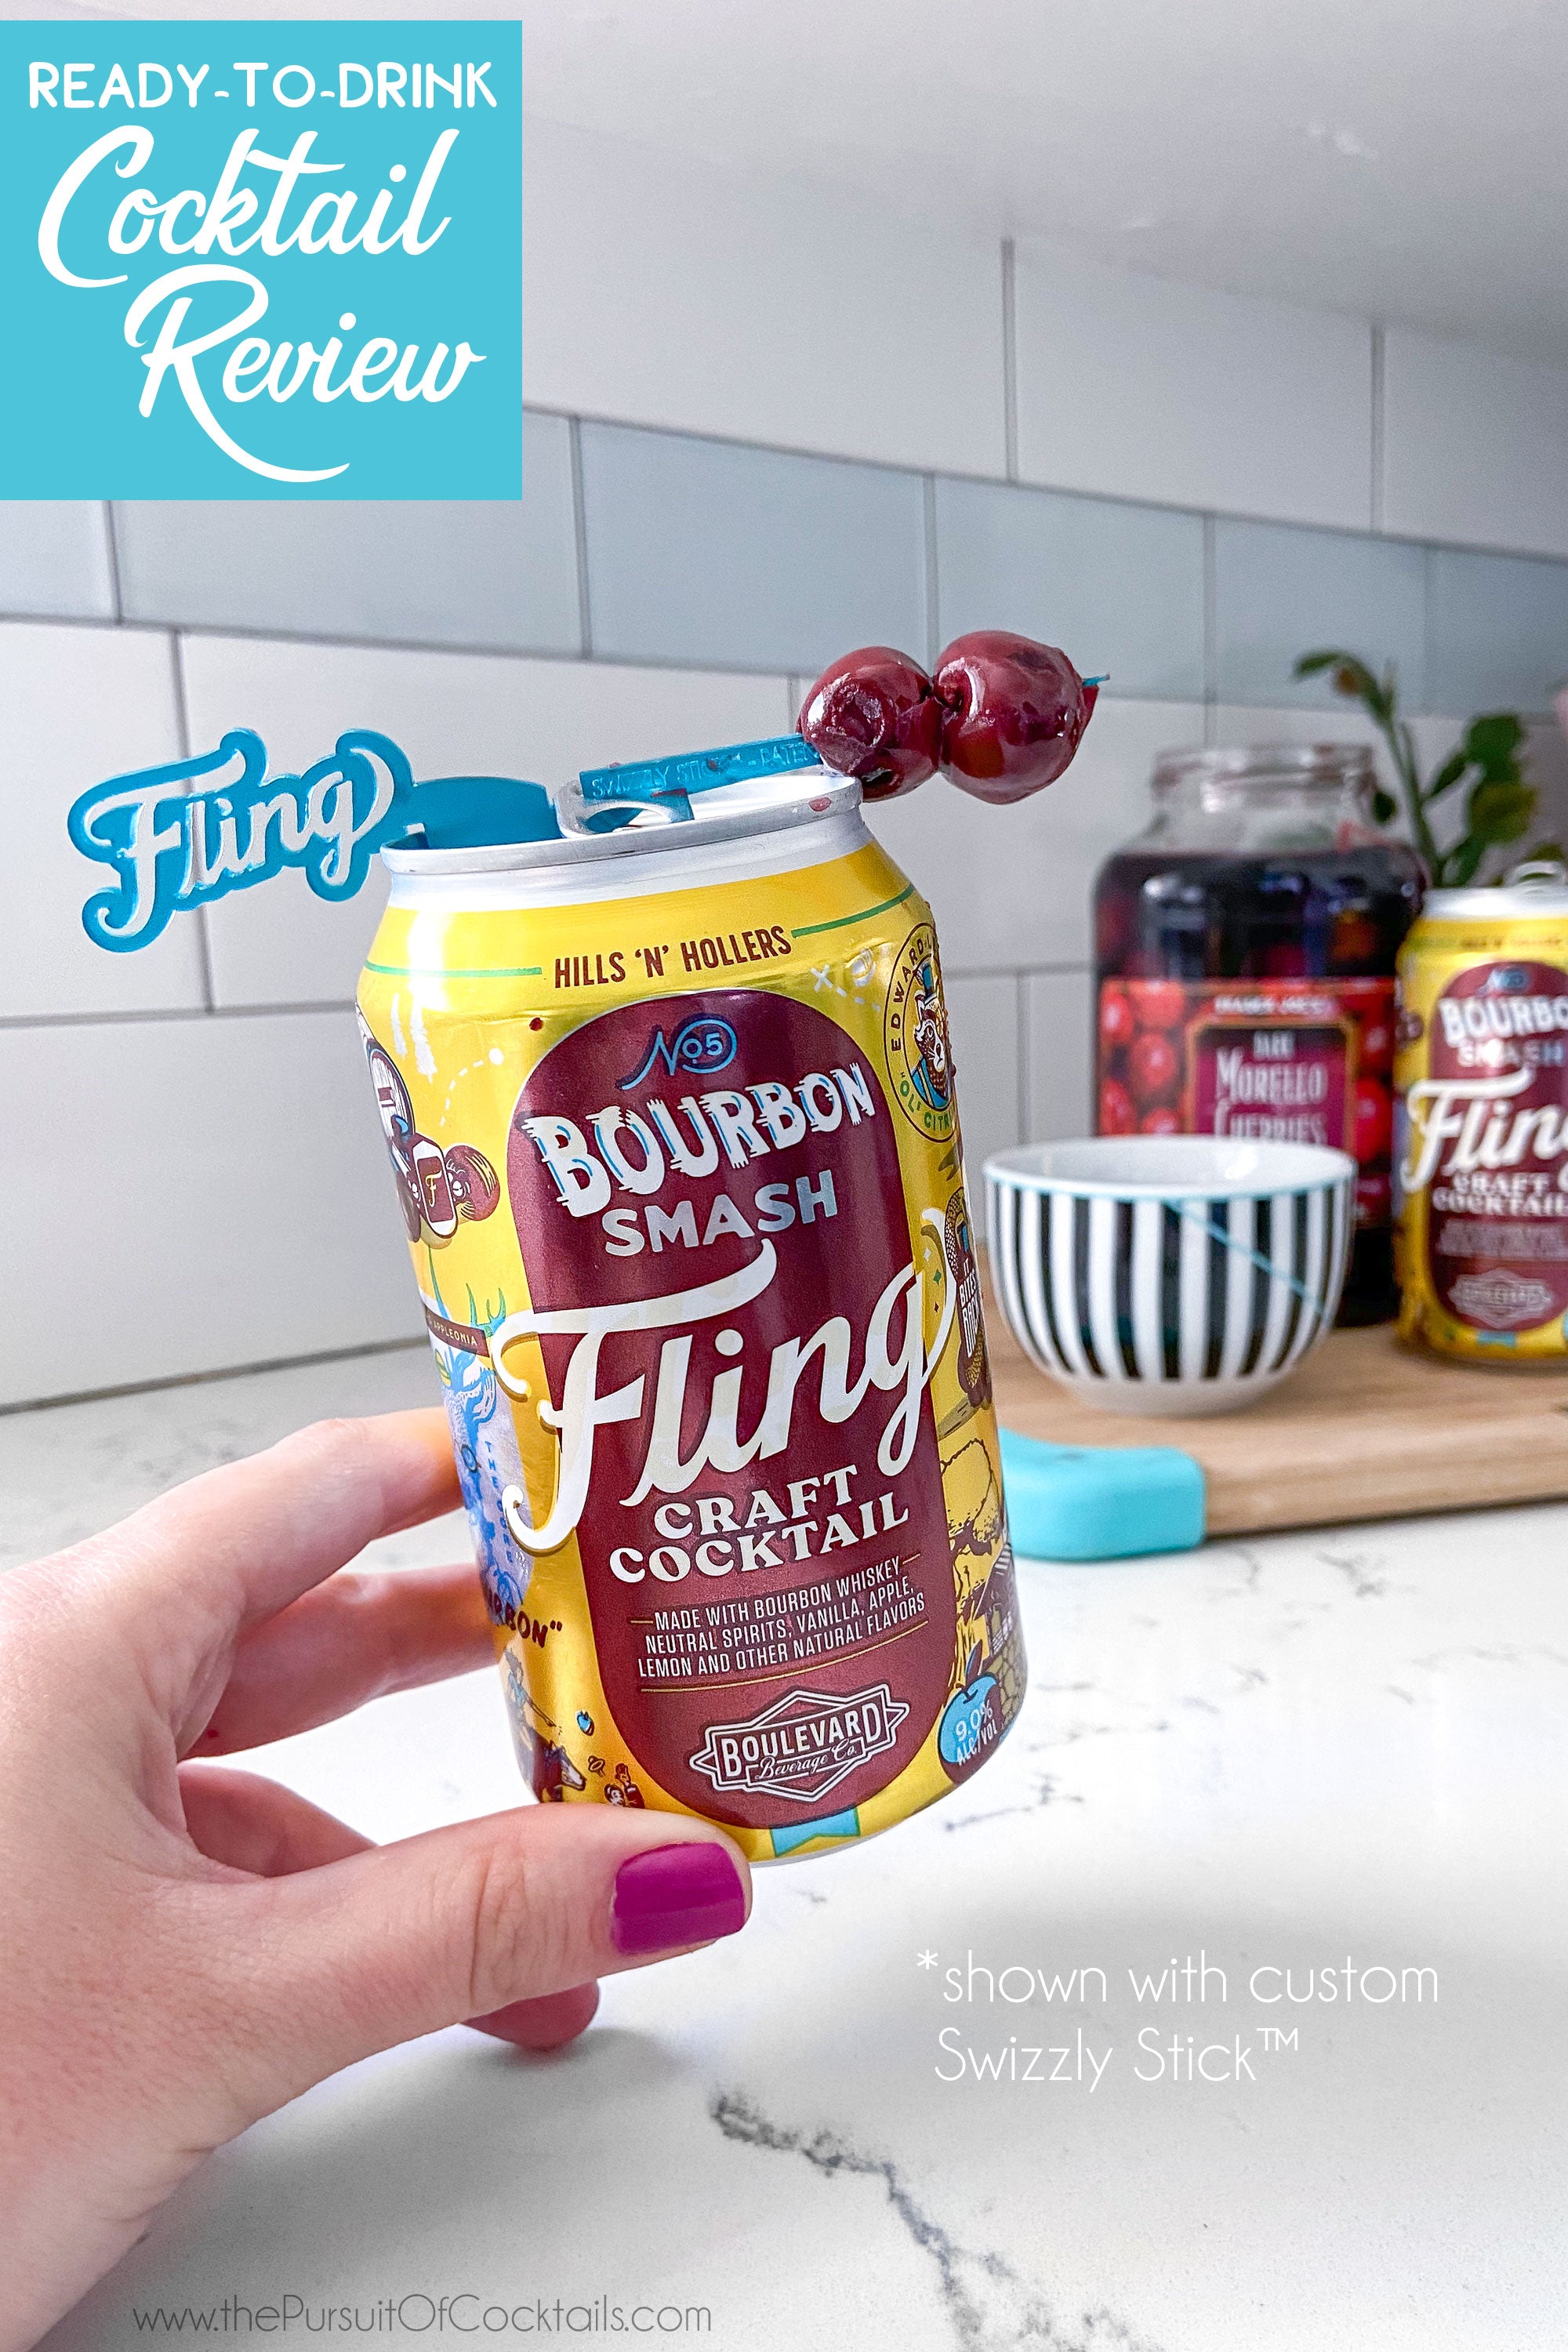 Fling Bourbon Smash canned cocktail reviewed by The Pursuit of Cocktails